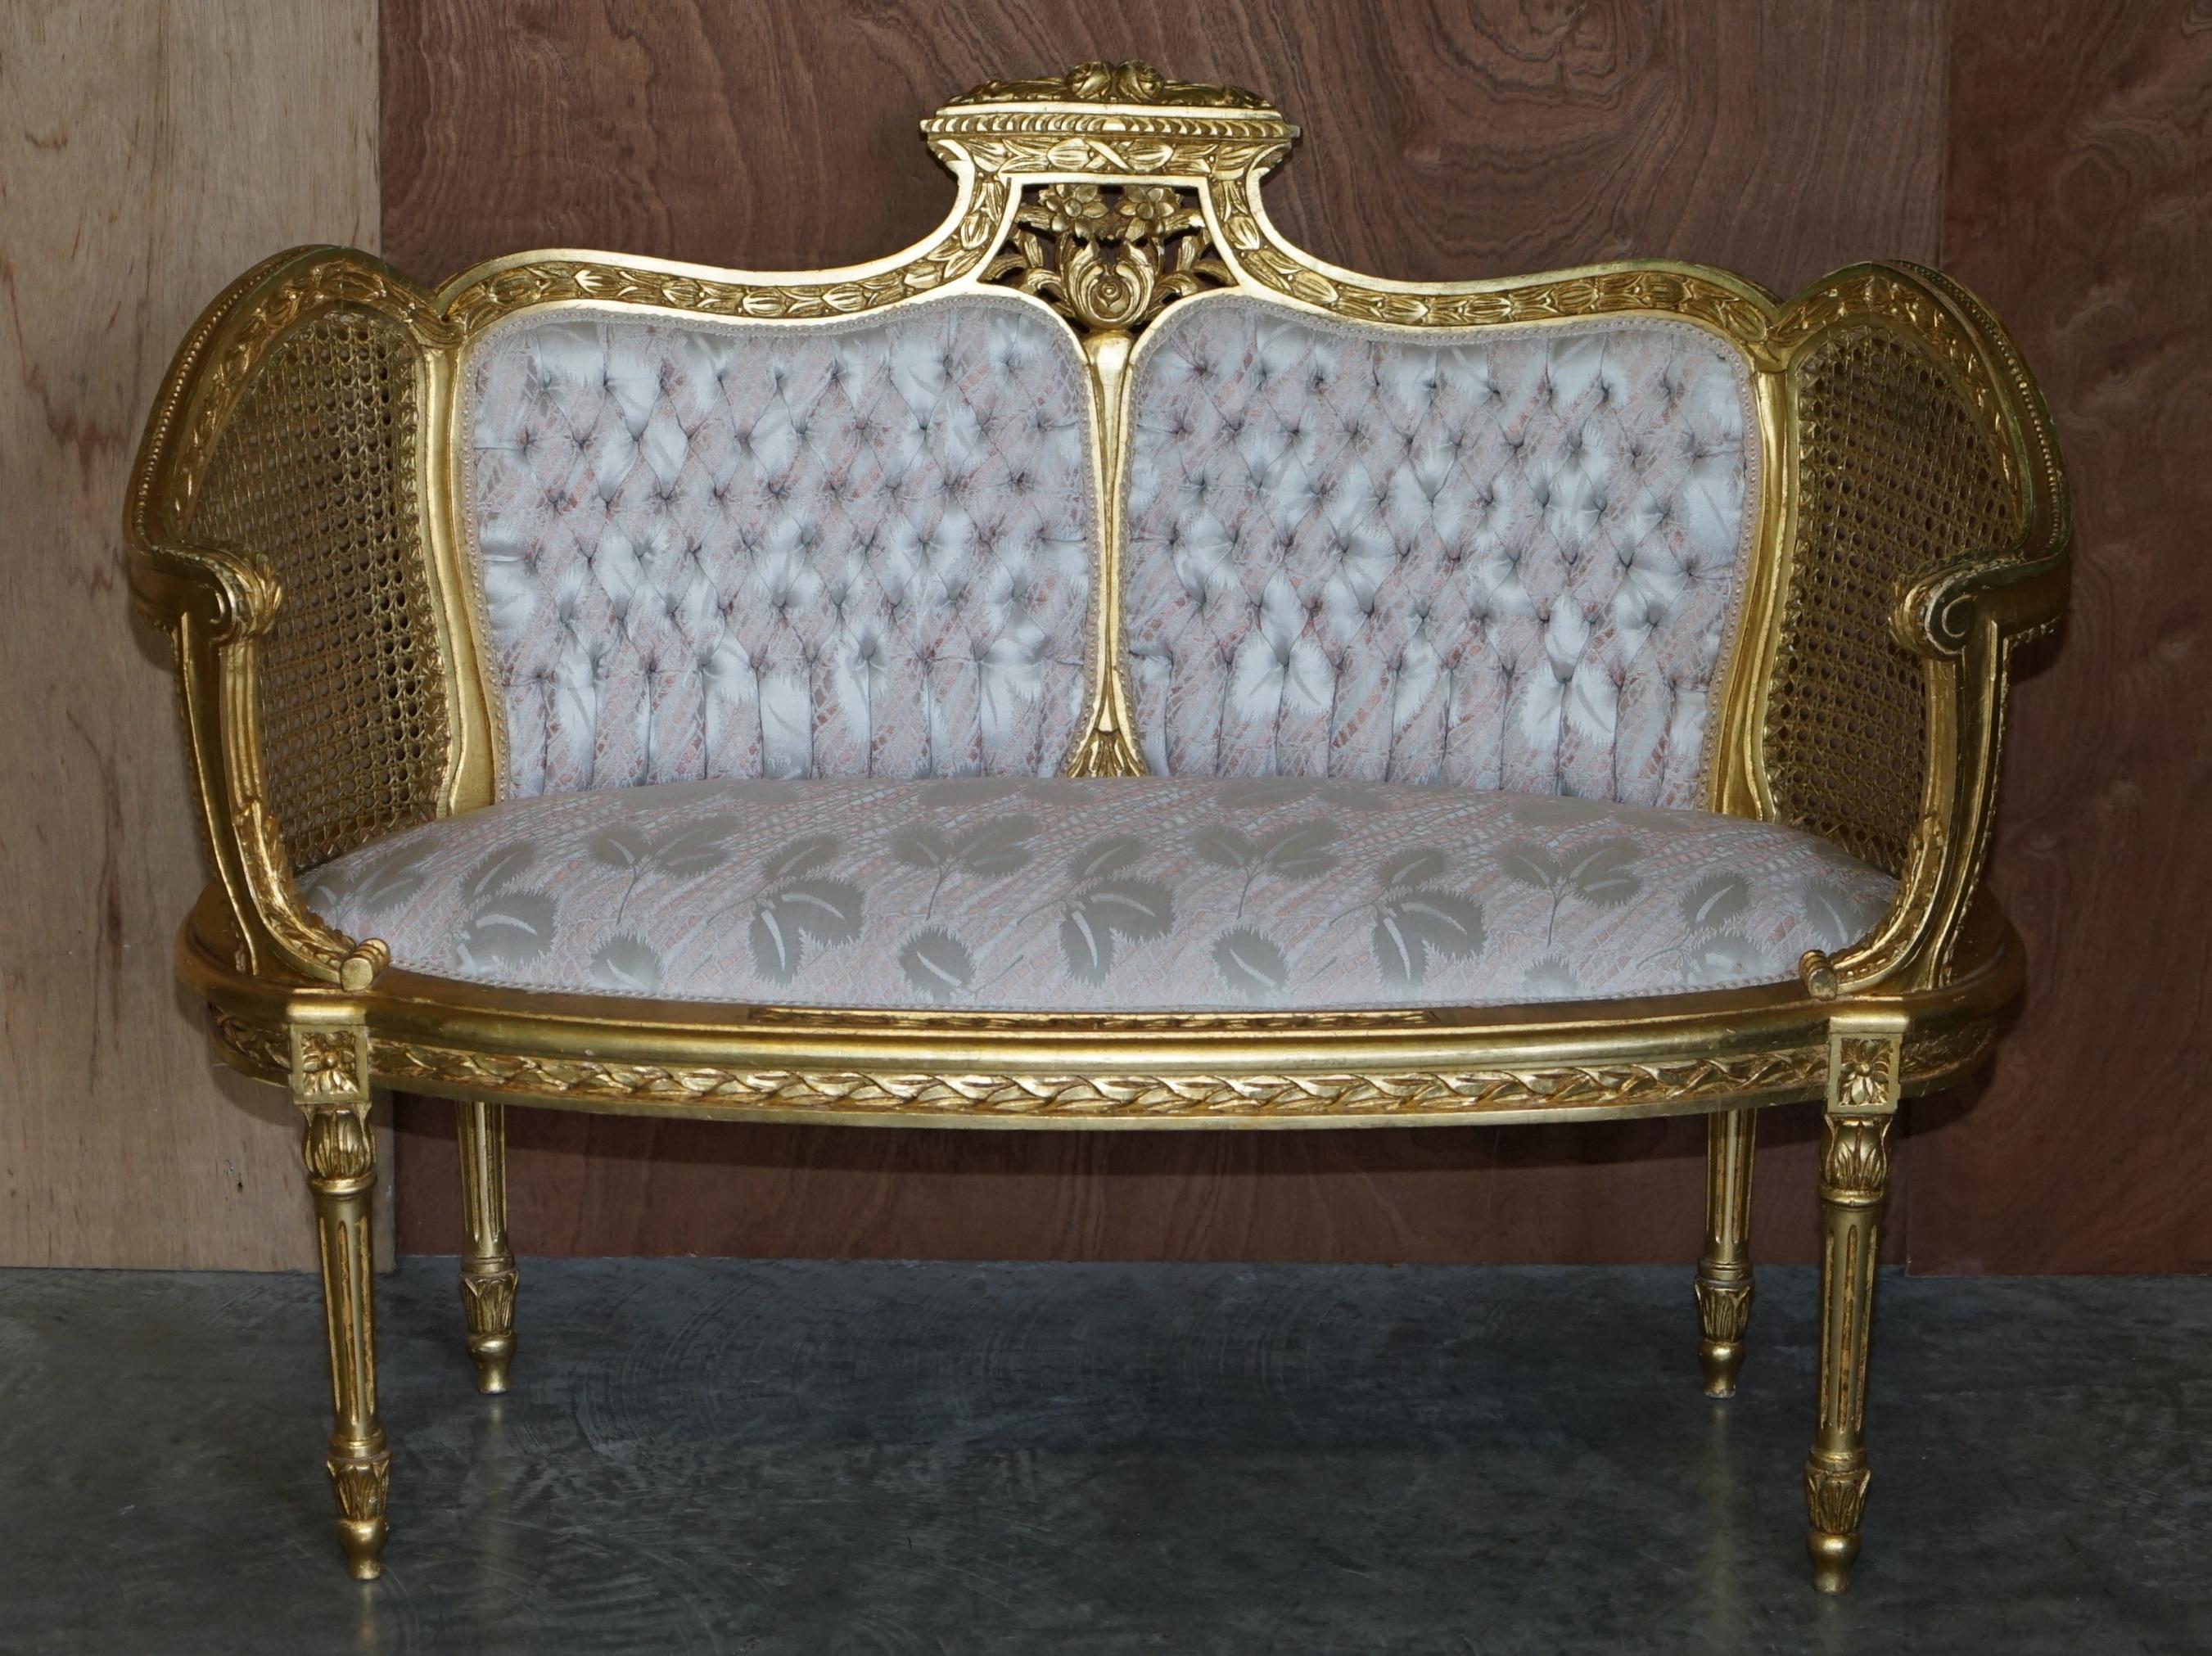 We are delighted to offer this stunning original circa 1860-1870 Napoleon III Louis XVI style bergère settee which is part of a suite 

This sofa comes with a matching pair of parlour armchairs which are listed under my other items

This is a